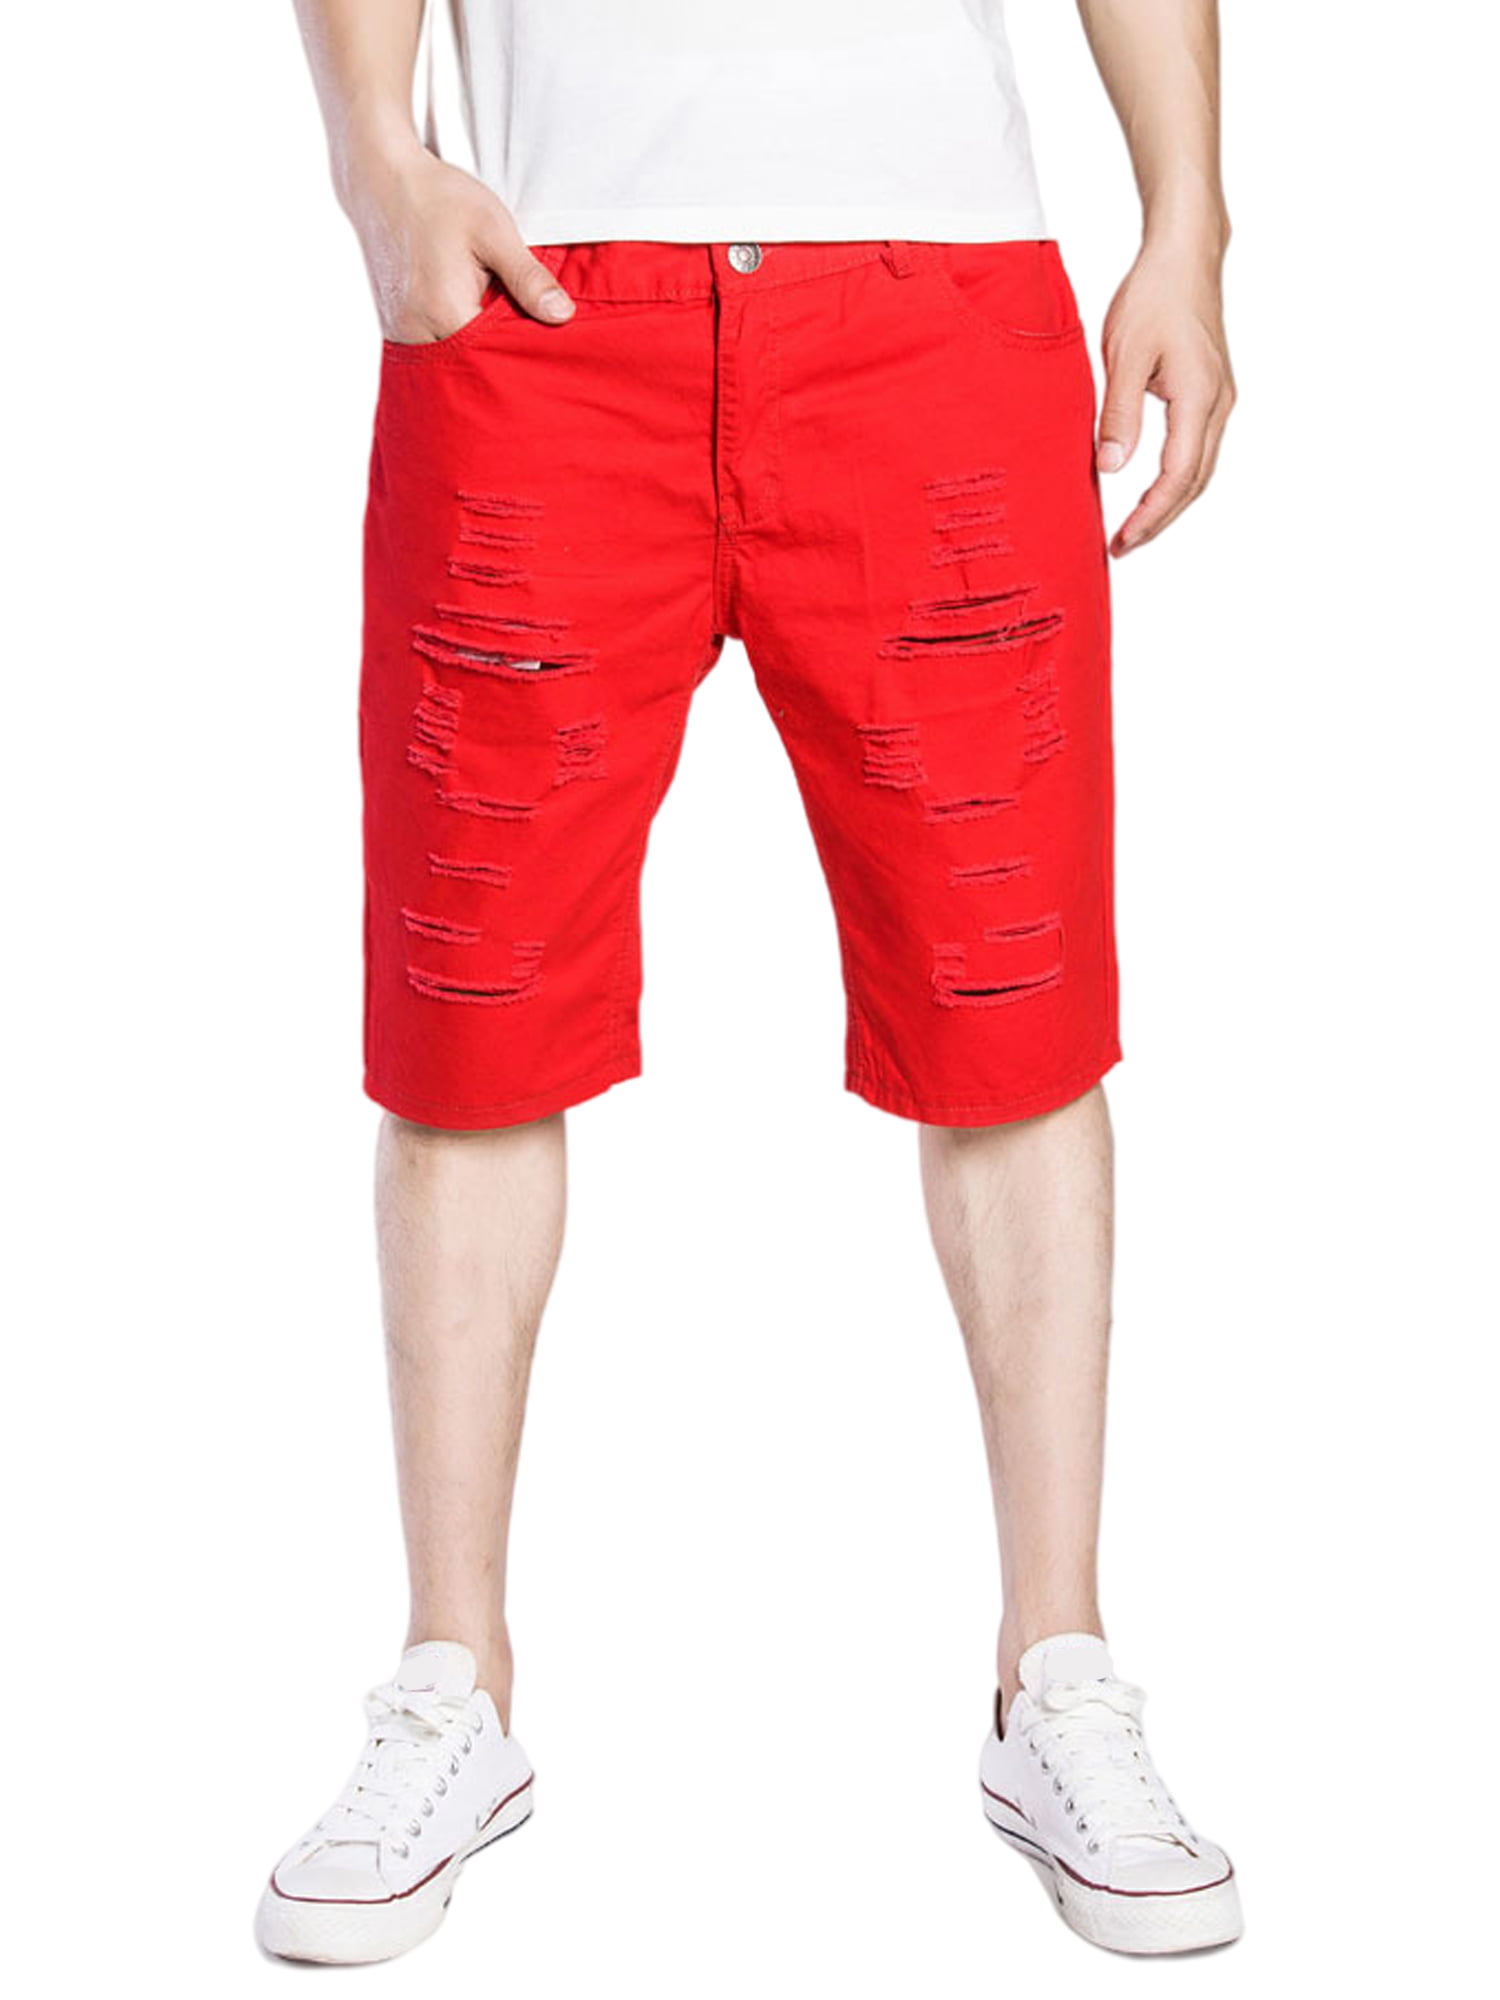 Mens Casual Jeans Shorts Classic Slim Fit 7 Inseam Pocket Shorts Summer Plus Size Overalls Shorts Workout Shorts 